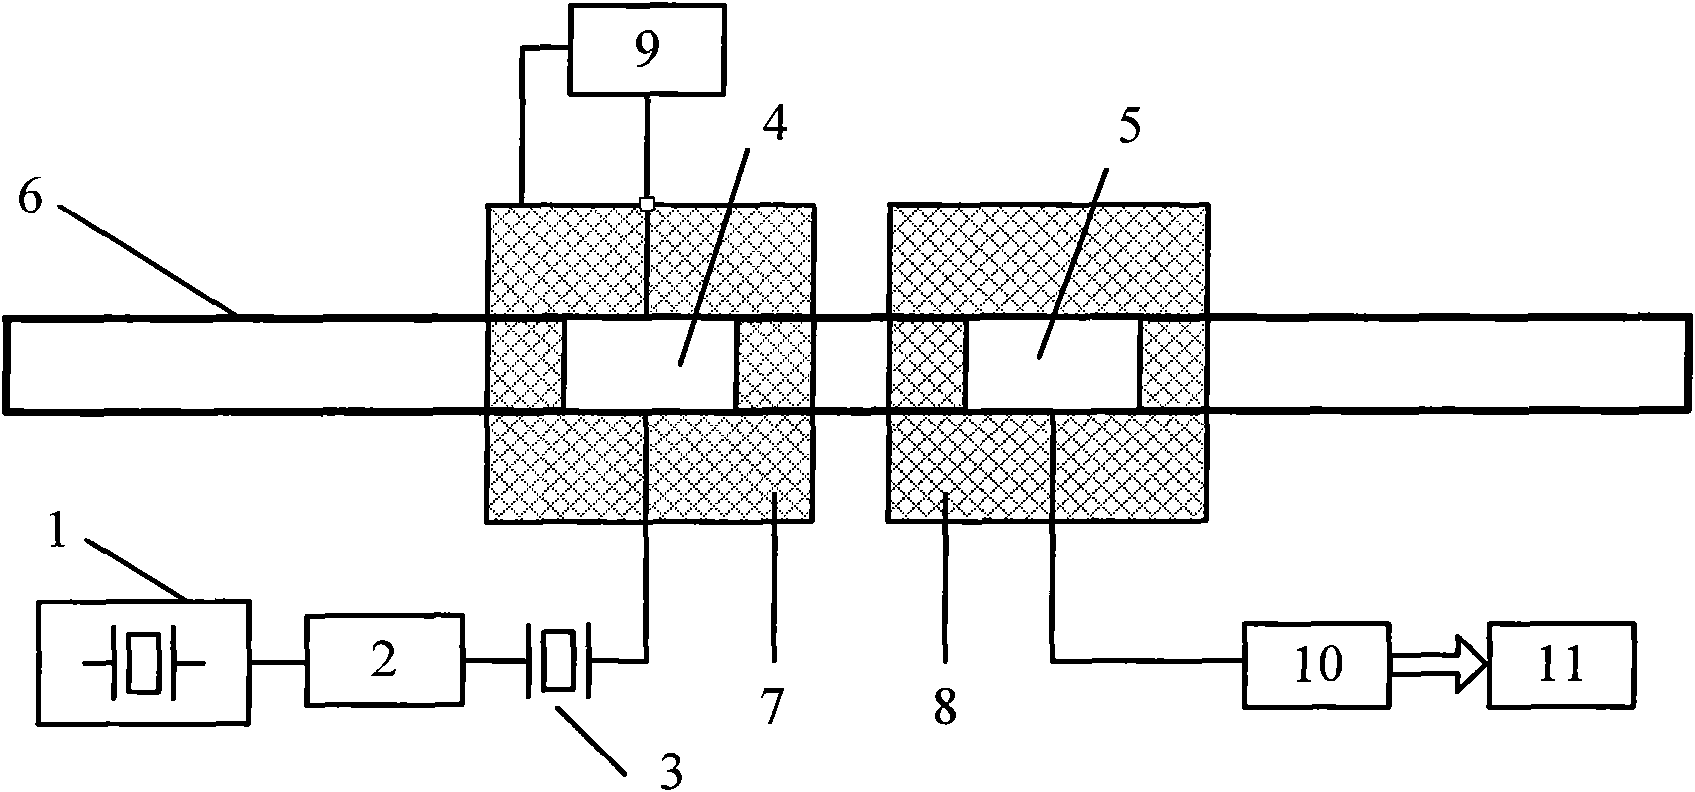 Non-contact conductometry measuring device stimulated by quartz crystal oscillator and method